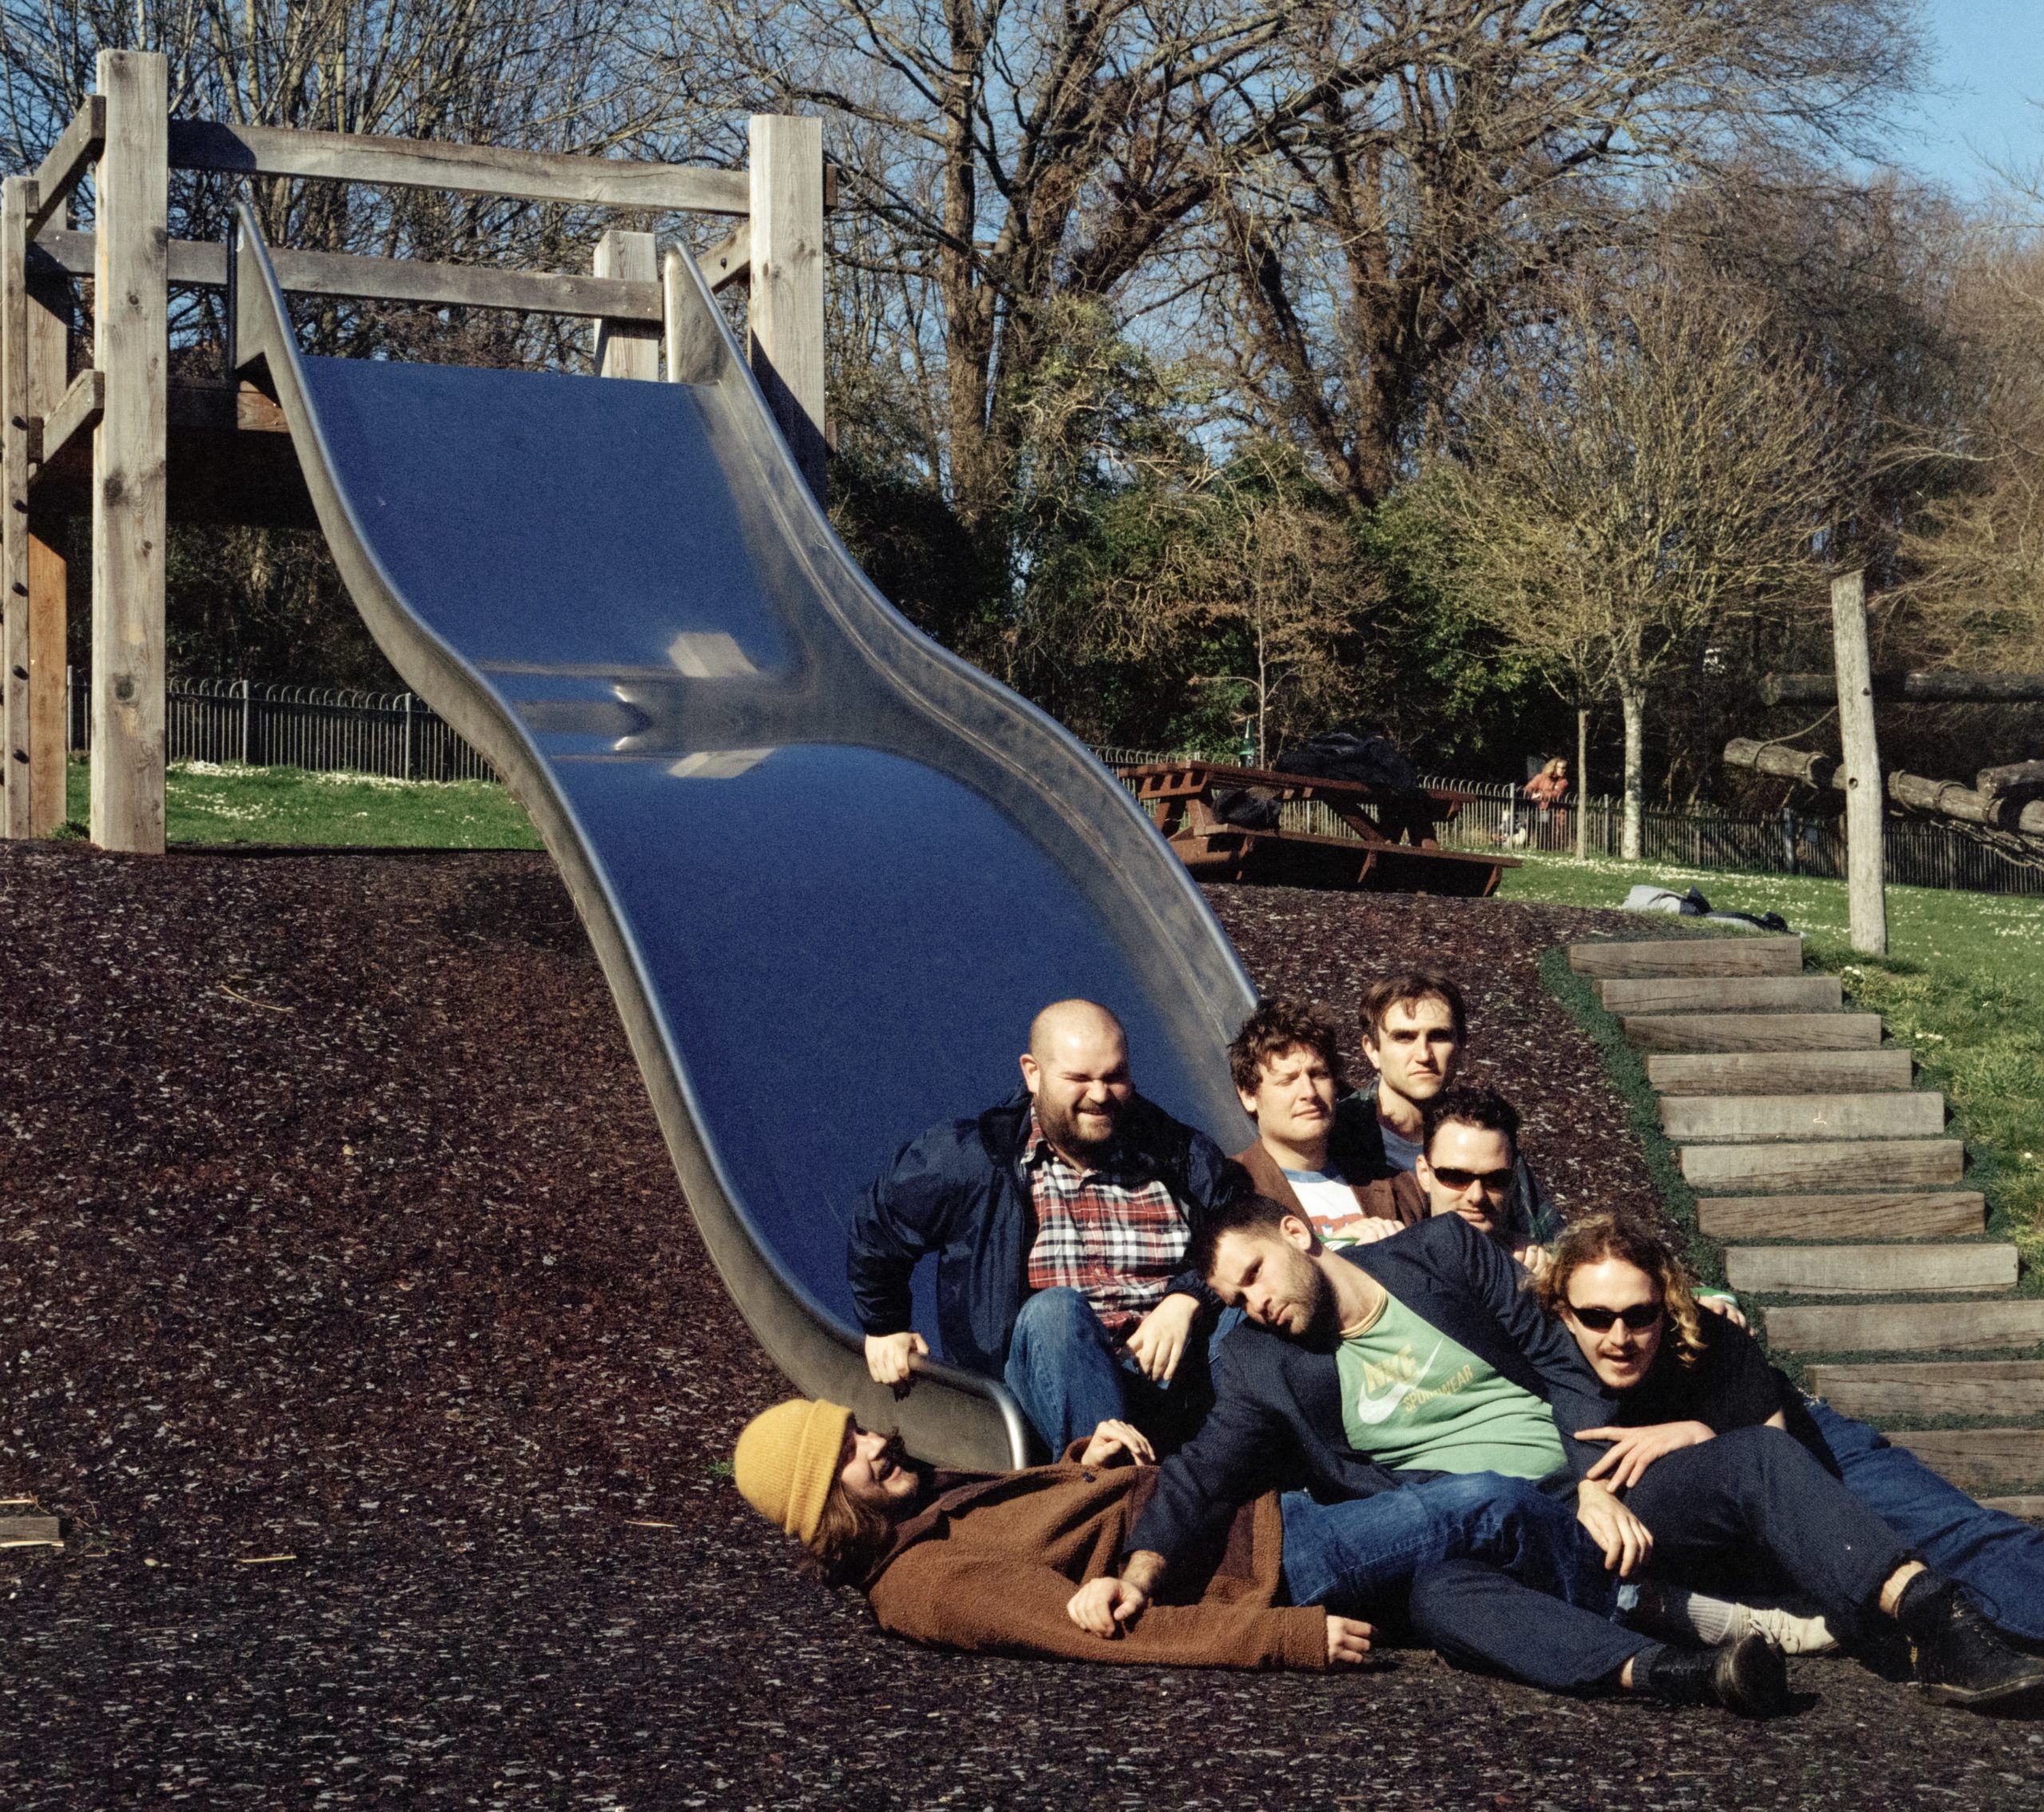 The seven piece band KEG in a playground at the bottom of a slide